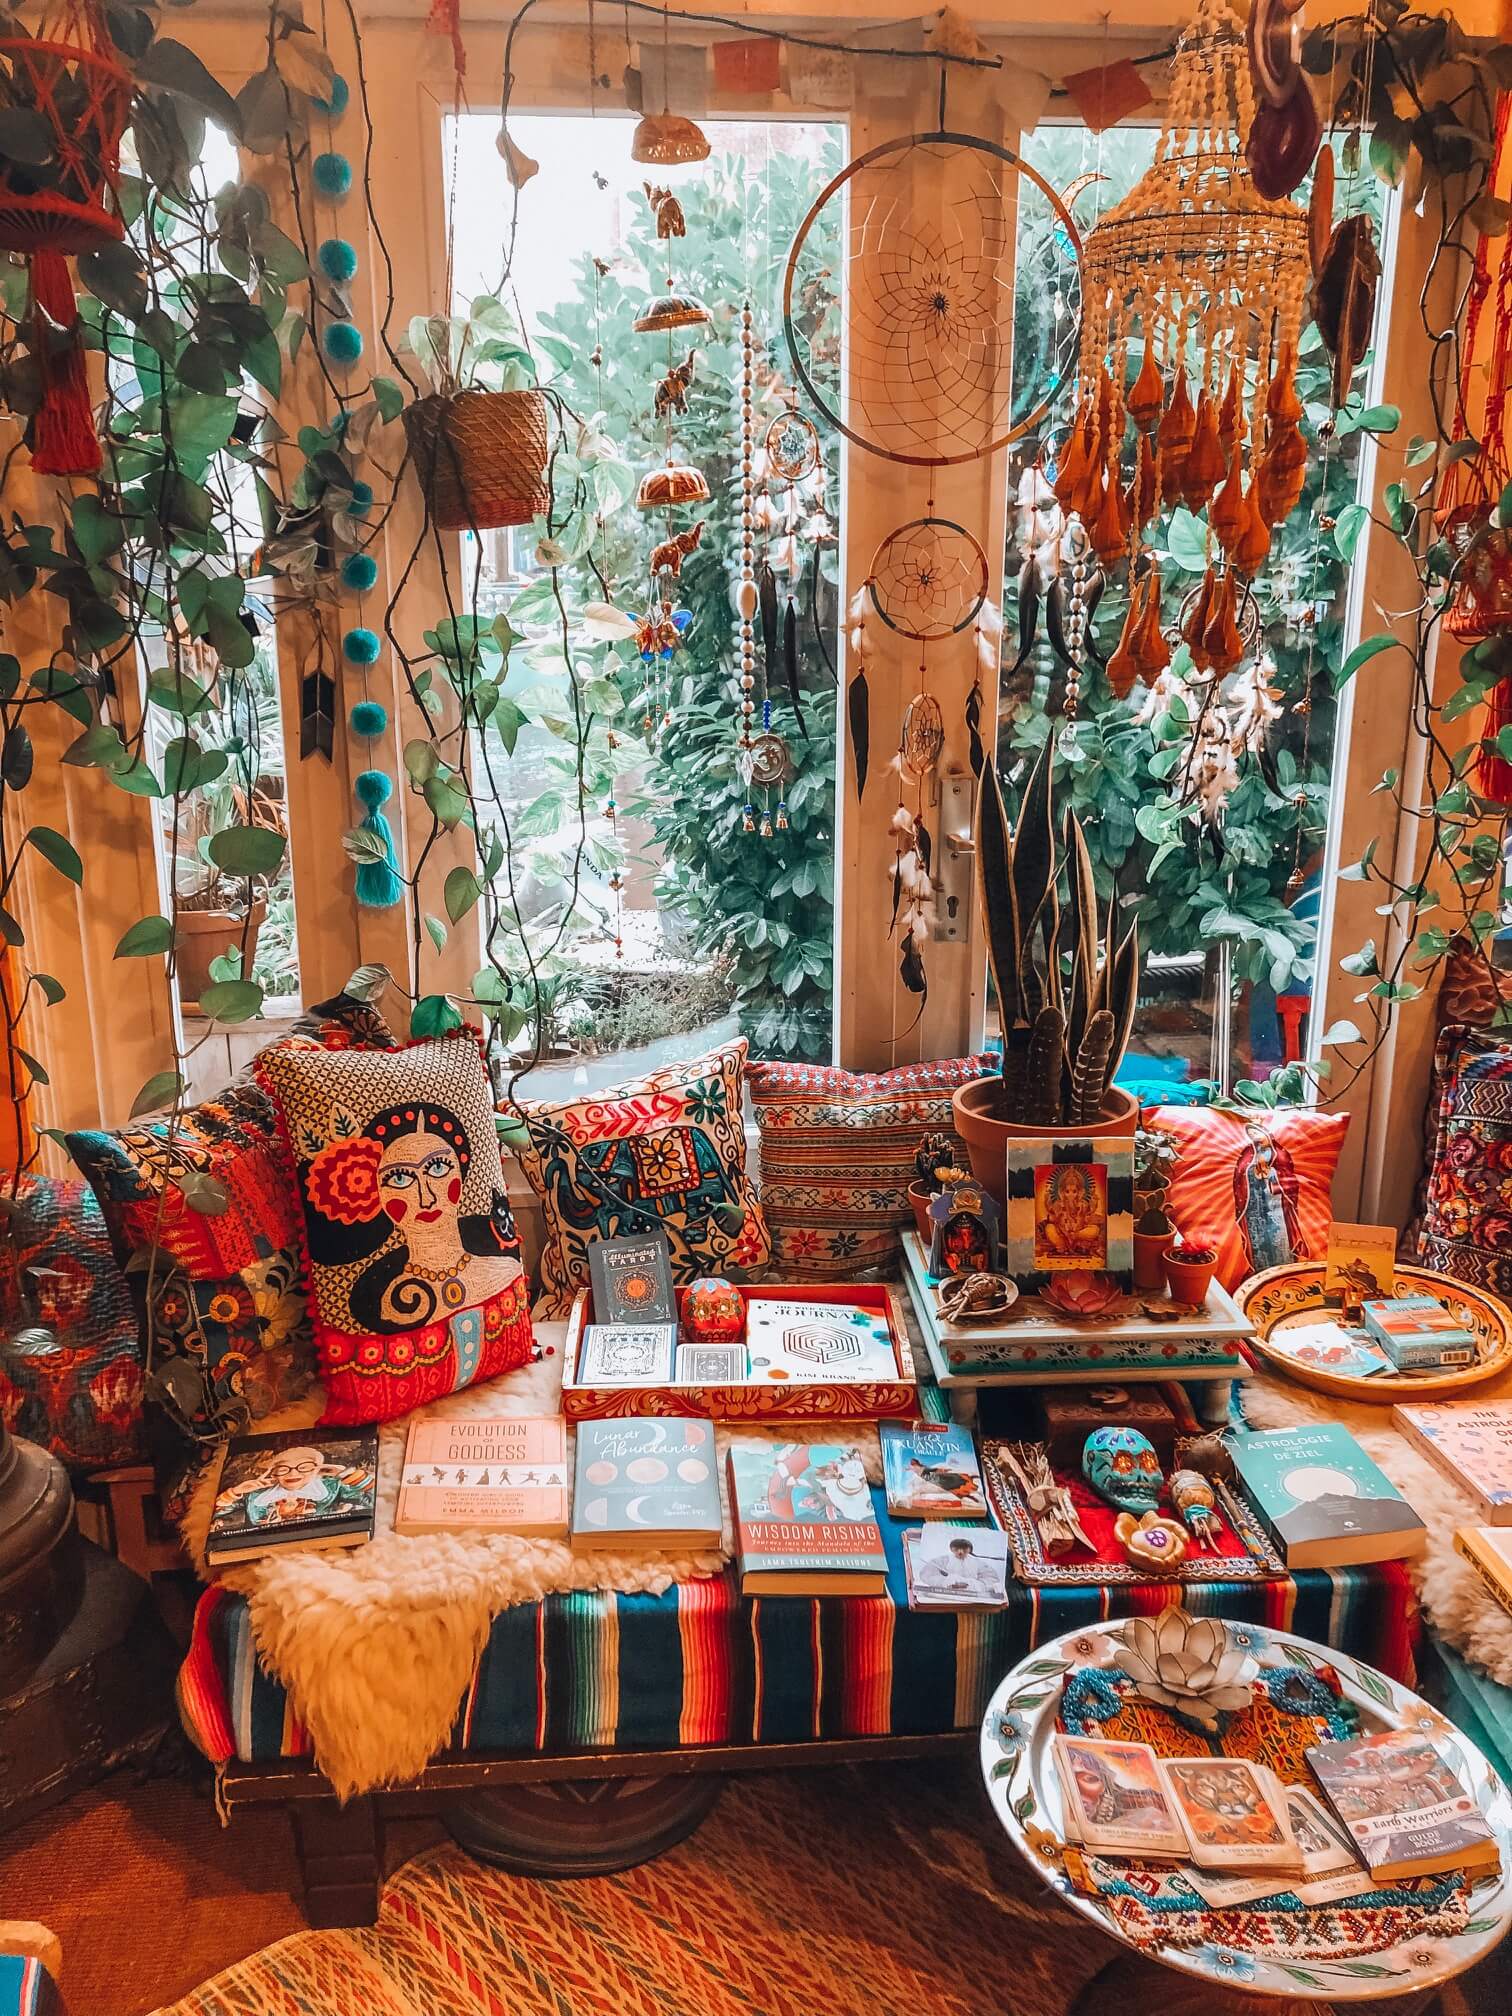 Boho Gypsy Home Decor - Boho Decor Bliss ⍕⋼ bright gypsy color & hippie bohemian ... / Browse our number of mixed color collections, art and craft products for perfect home decor and express your inner hippie.